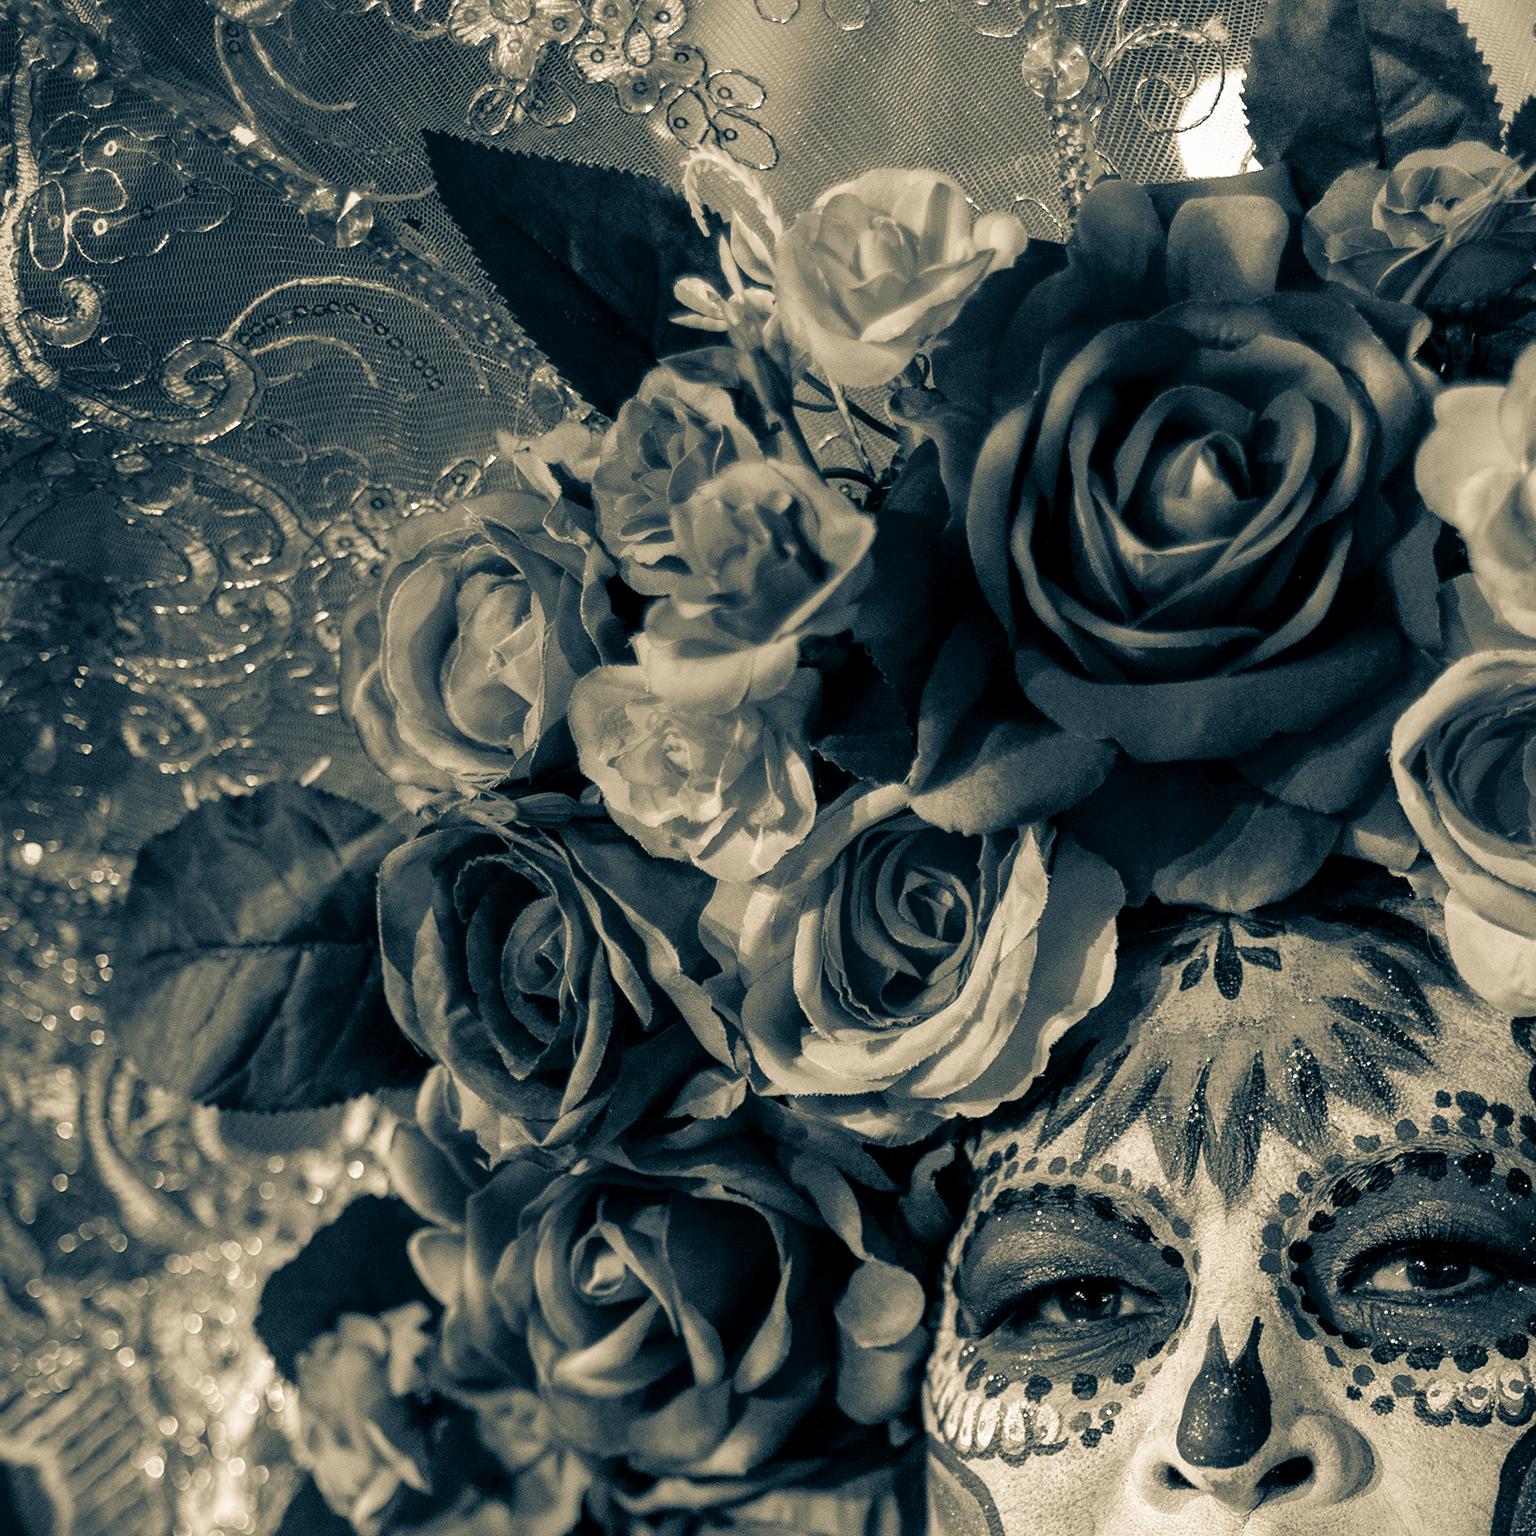 “A crown of roses for death”, Day of the Dead, Dia de los Muertos, Black and White version. Isla Mujeres, Mexico, 2023

Photograph by Cosmo Condina in  Black and White, of a woman dressed as a skeleton, with a crown of roses for the celebration of